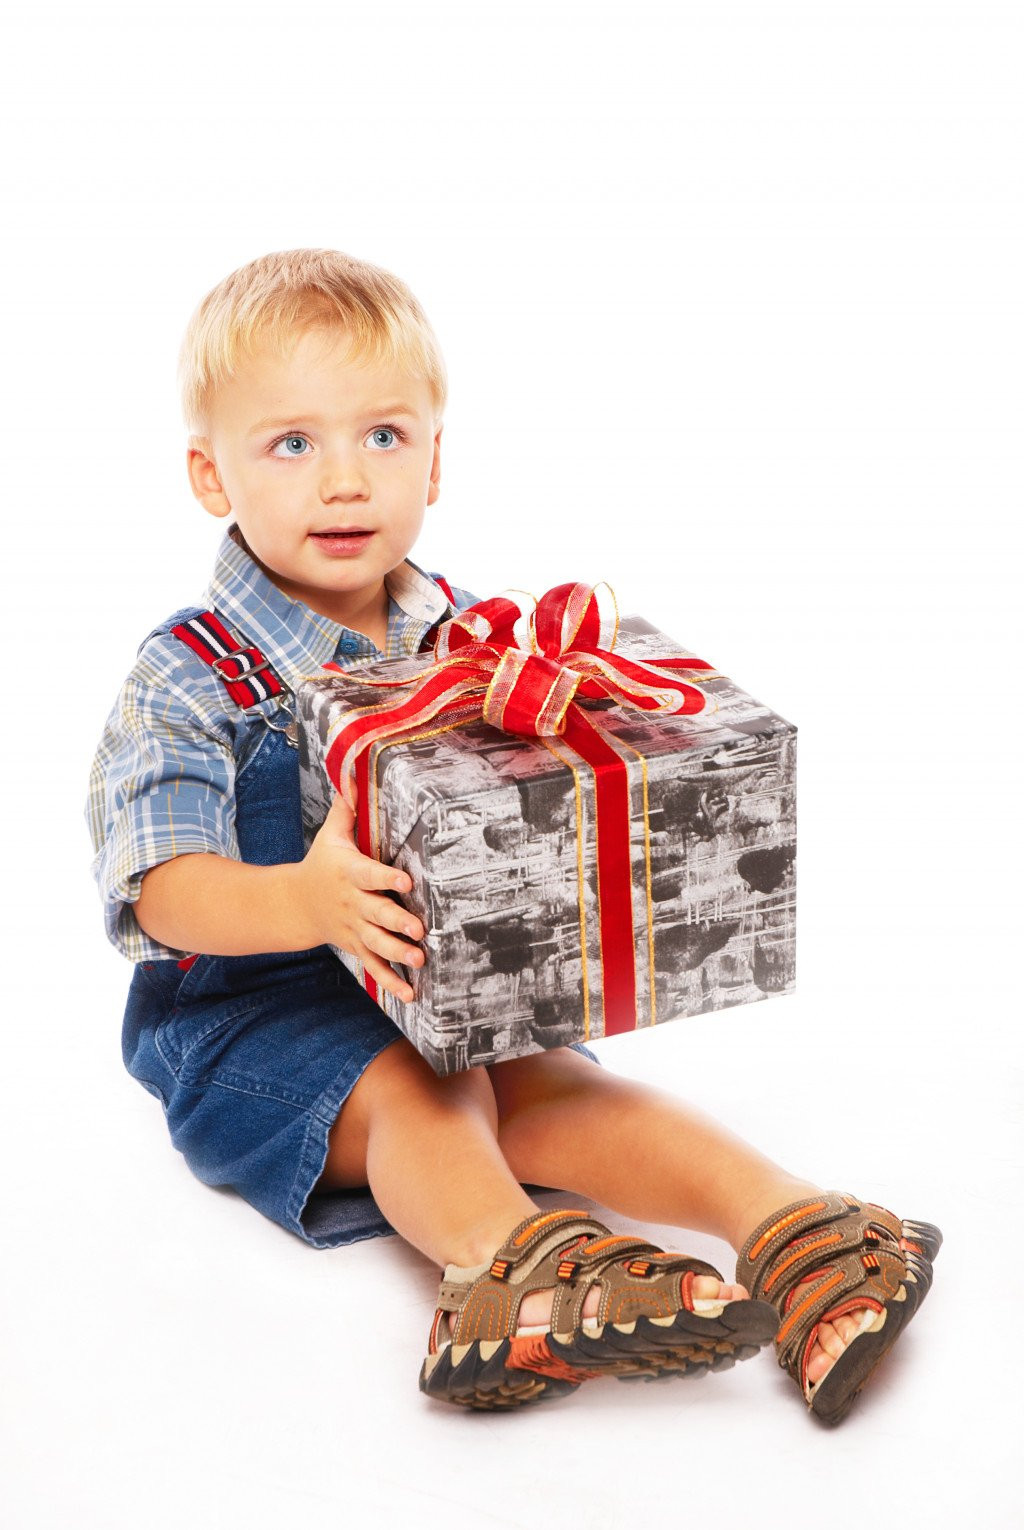 3 Year Old Boy Birthday Gifts
 Best Birthday and Christmas Gift Ideas for a Three Year